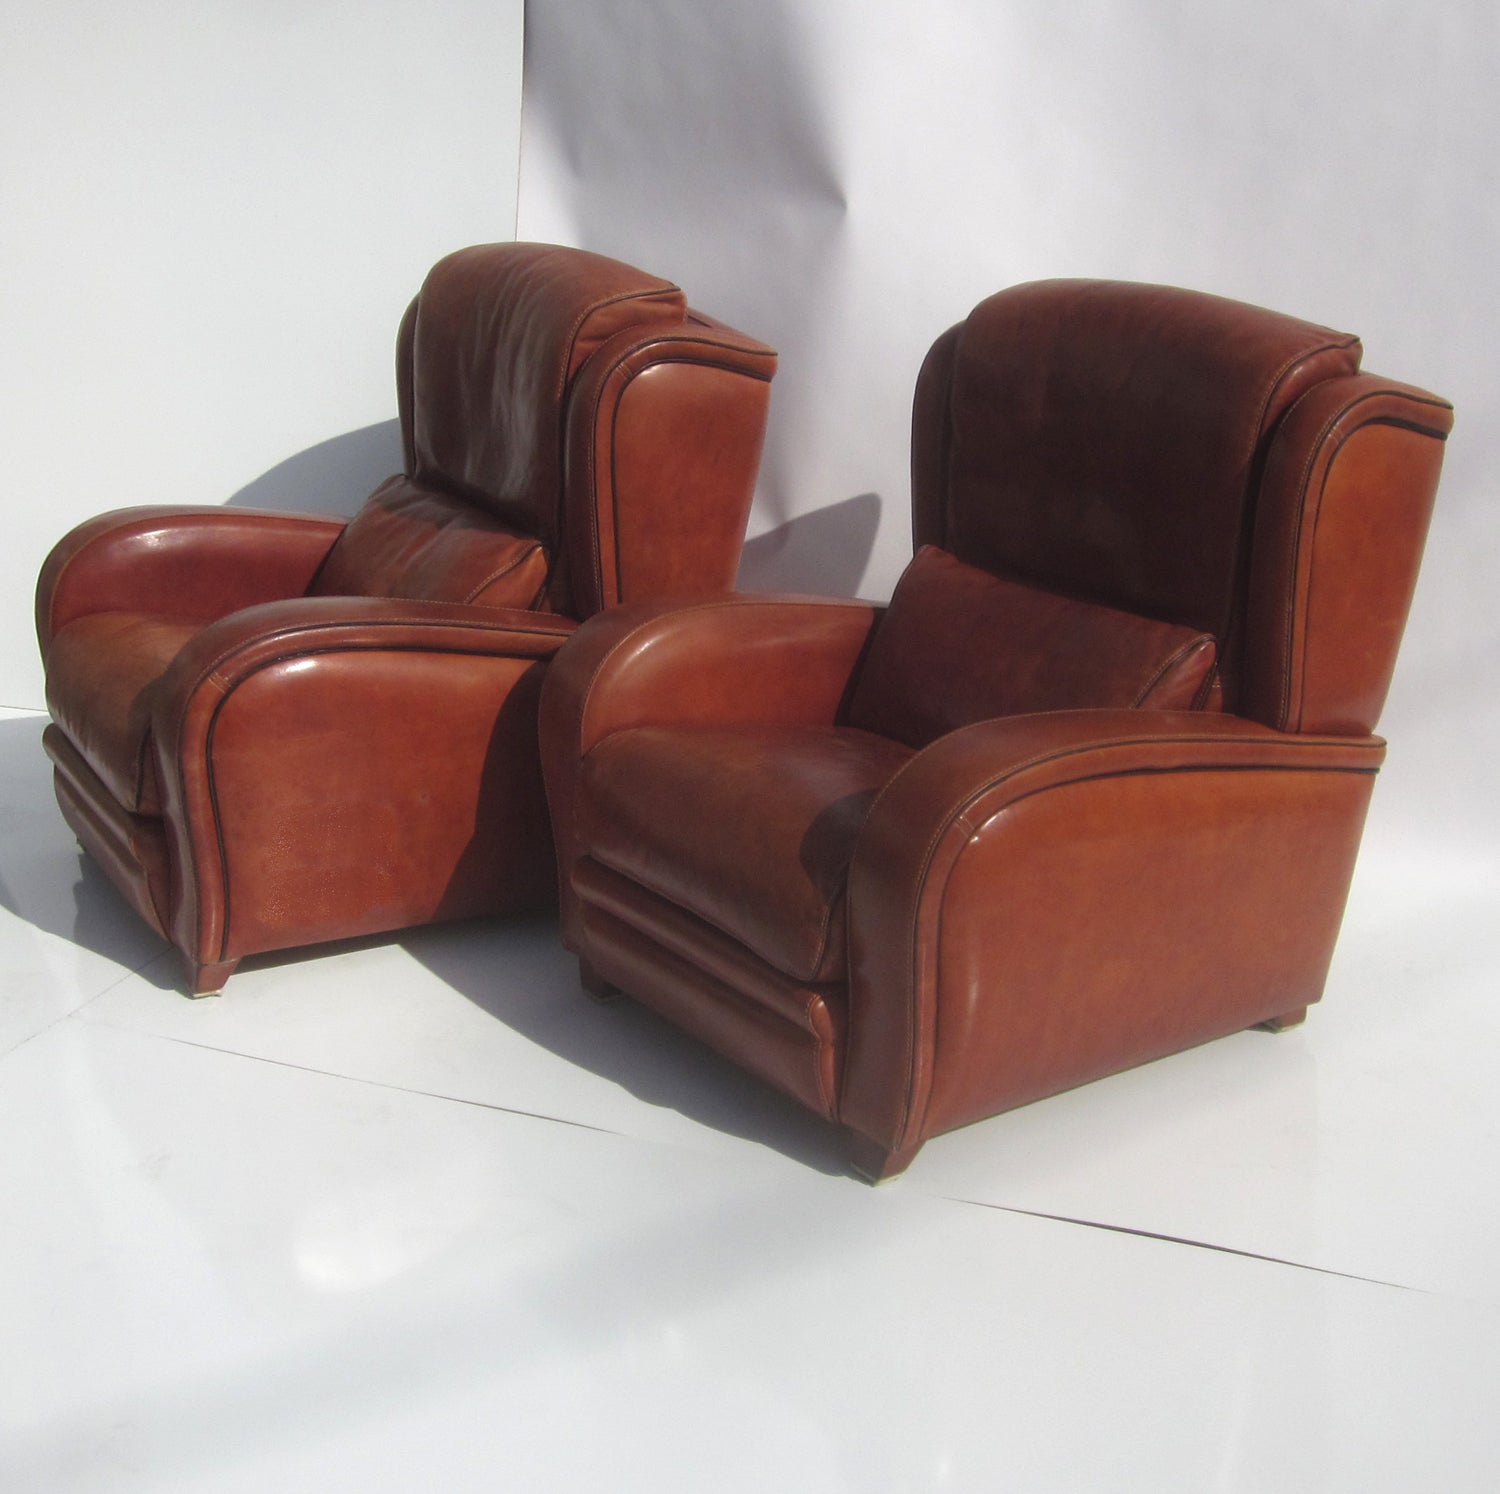 Aged Leather Club Chairs or Screening Room Chairs